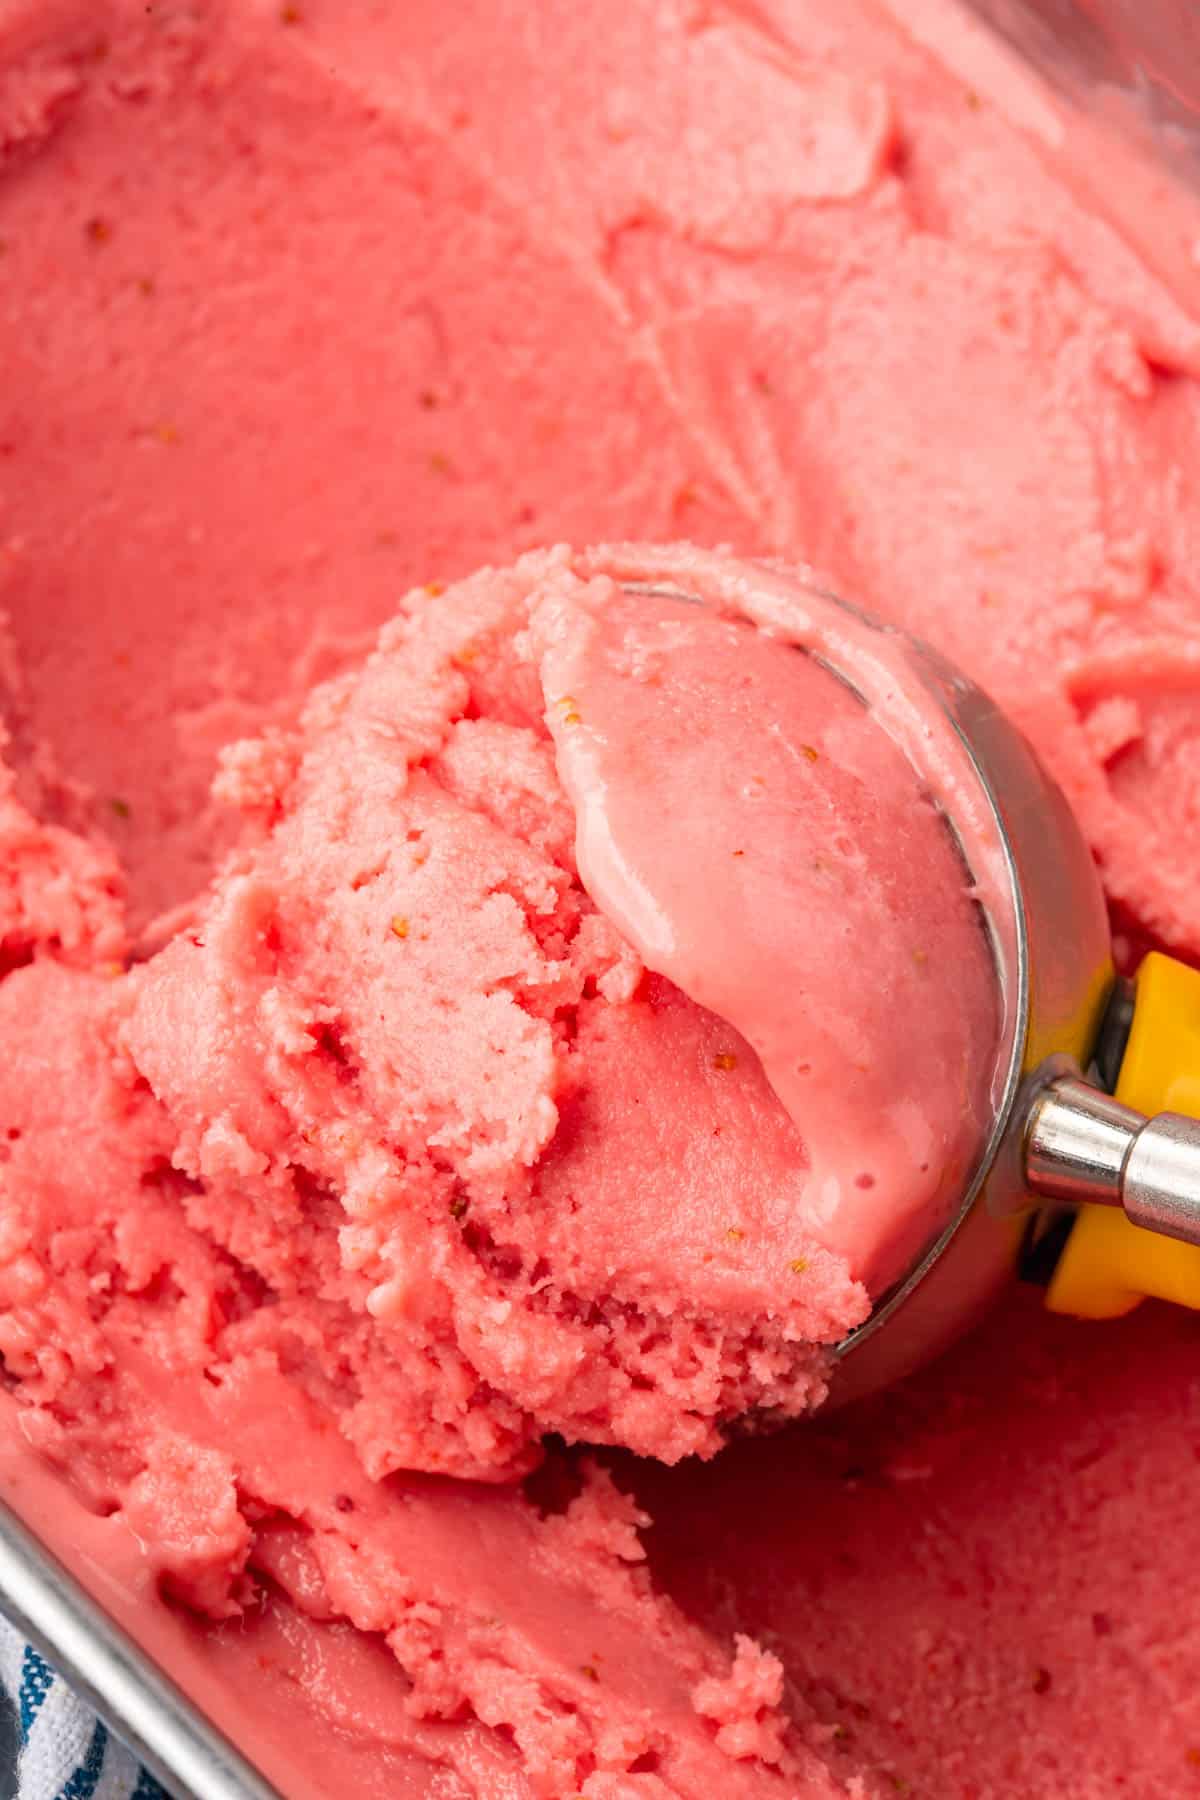 A closeup of a scooper scooping strawberry frozen yogurt from a tub.